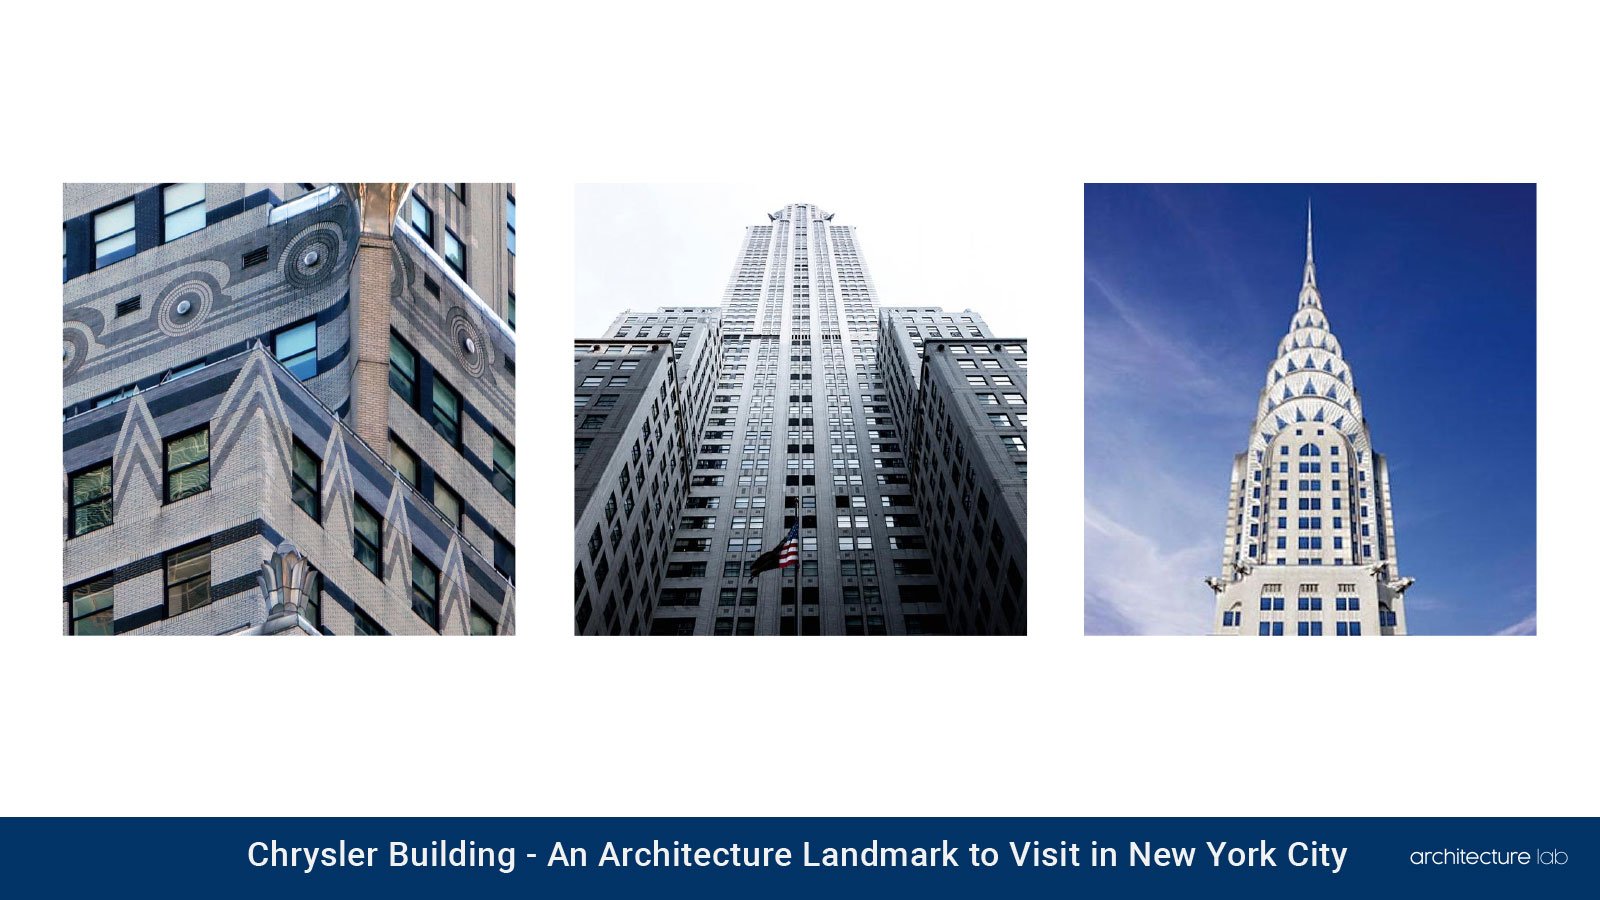 Chrysler building: an architecture landmark to visit in new york city